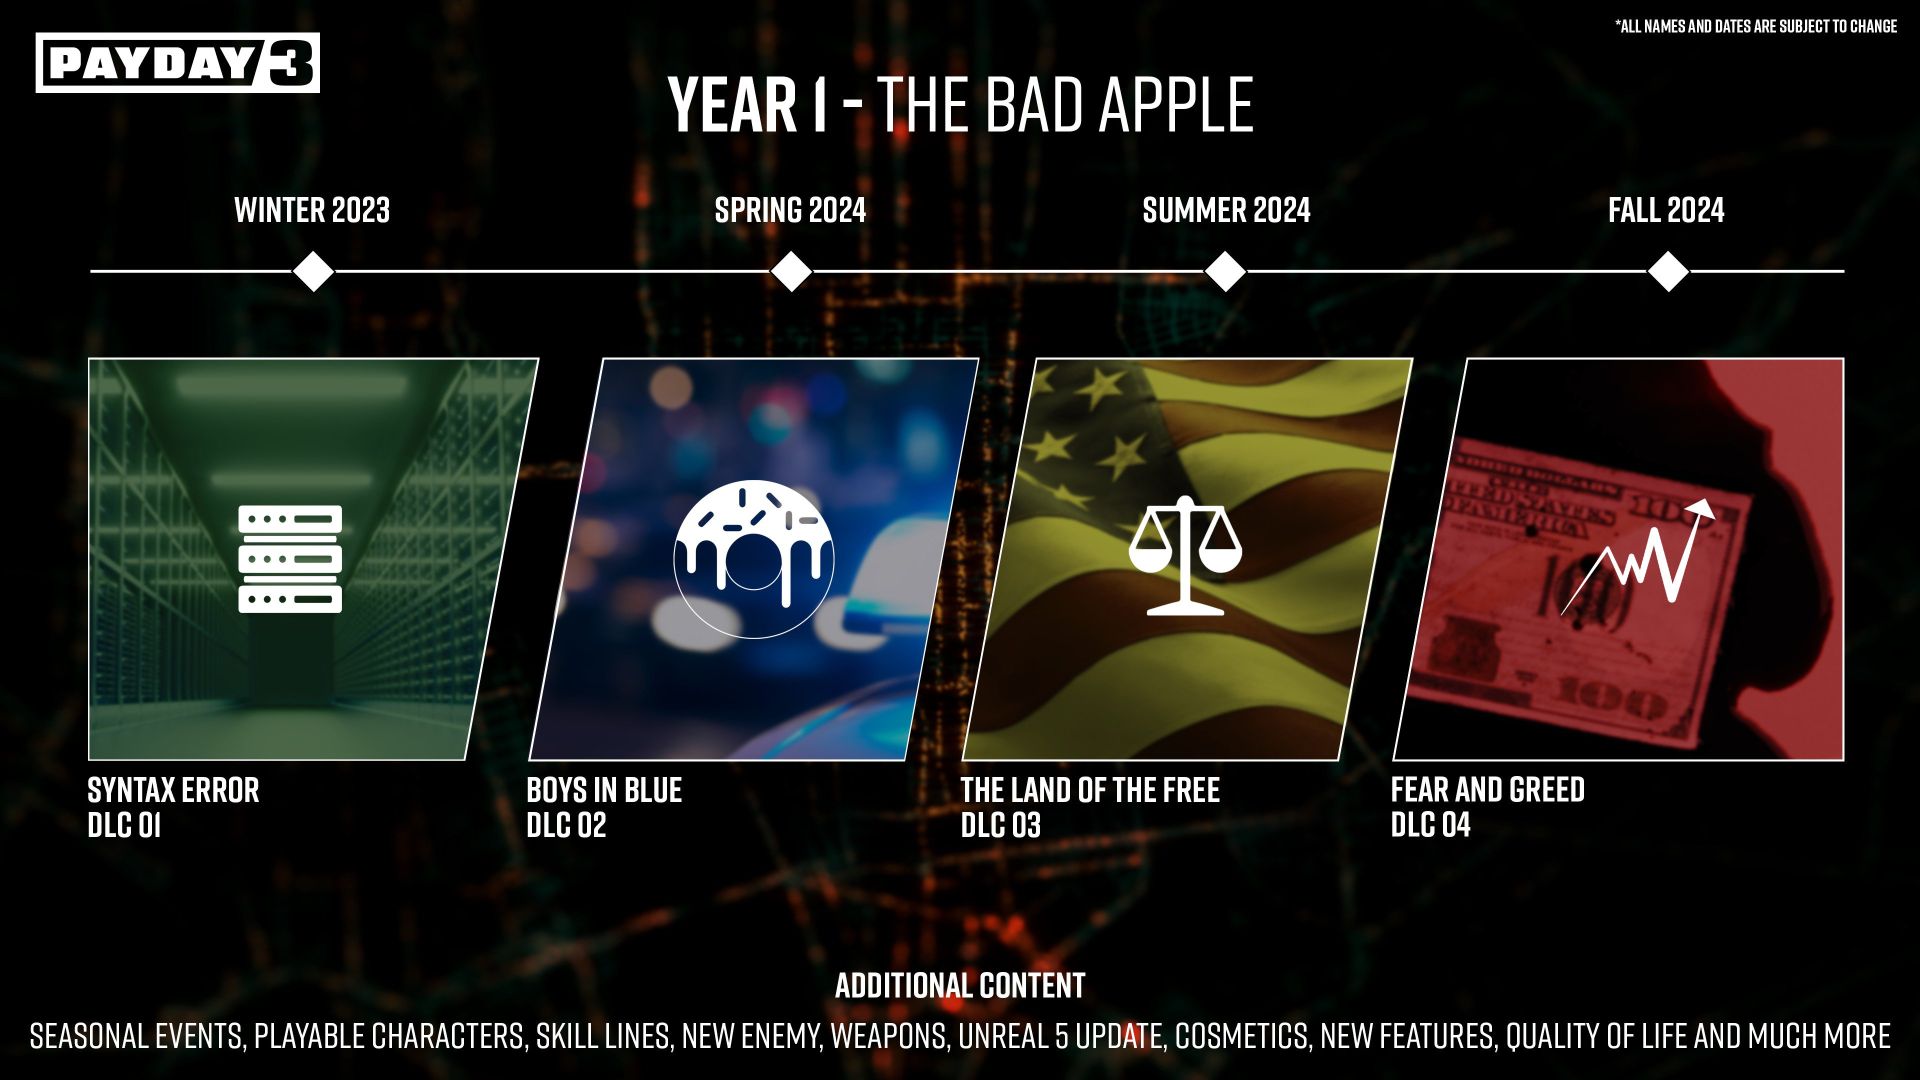 Payday 3 Year 1 - The Bad Apple